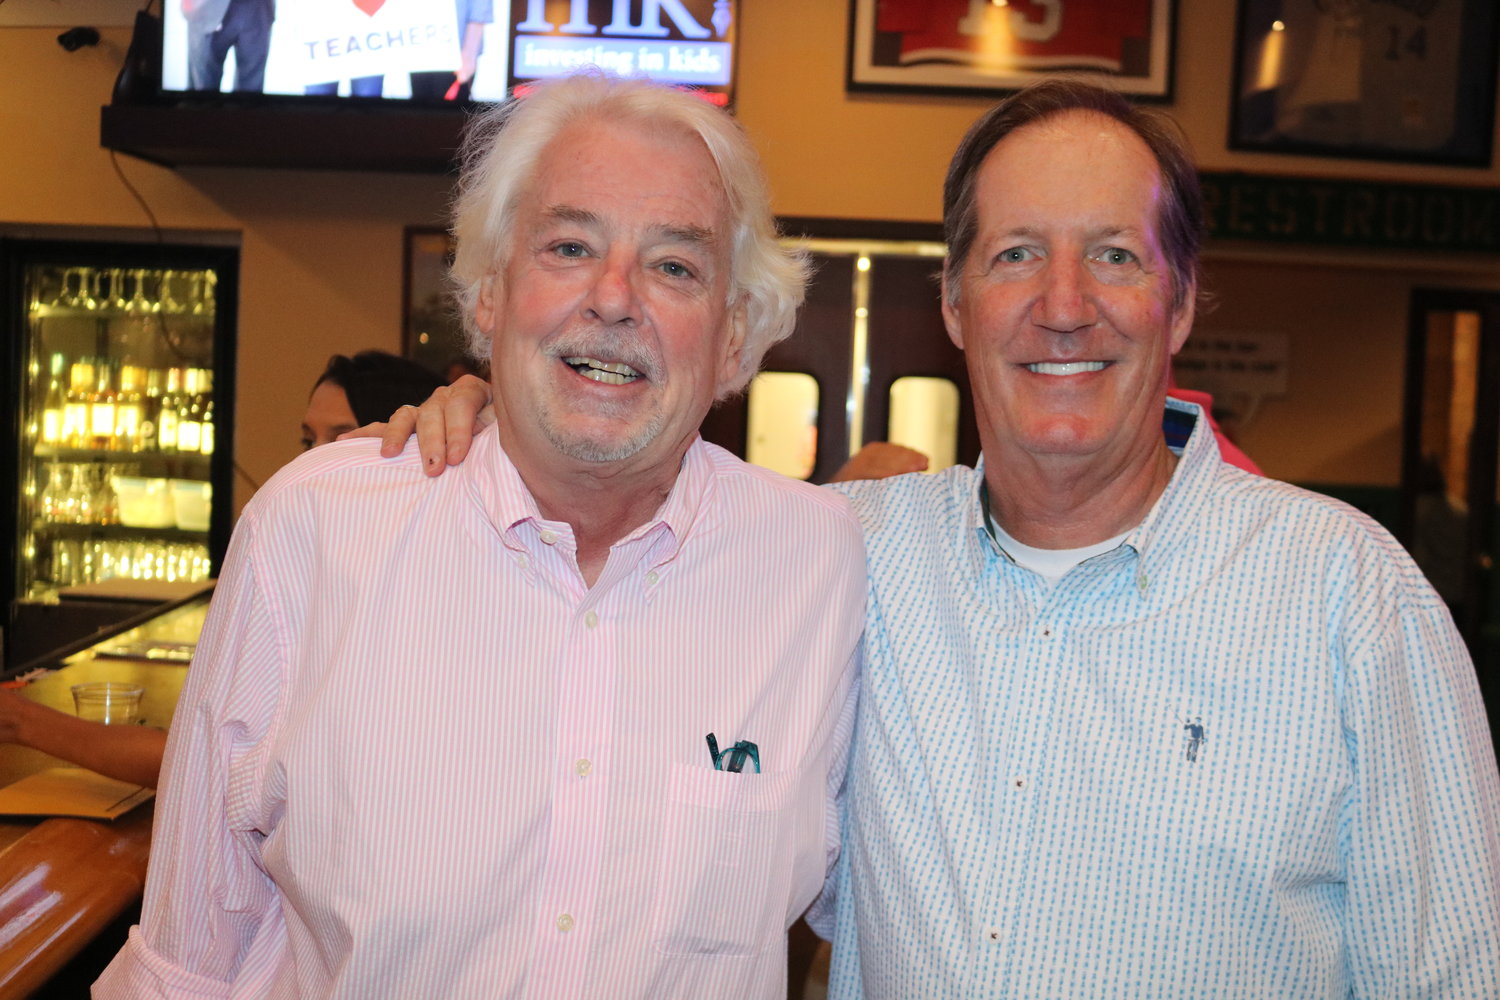 Murray Bros. Caddyshack owners Andy Murray and Mac Haskell hosted the event.